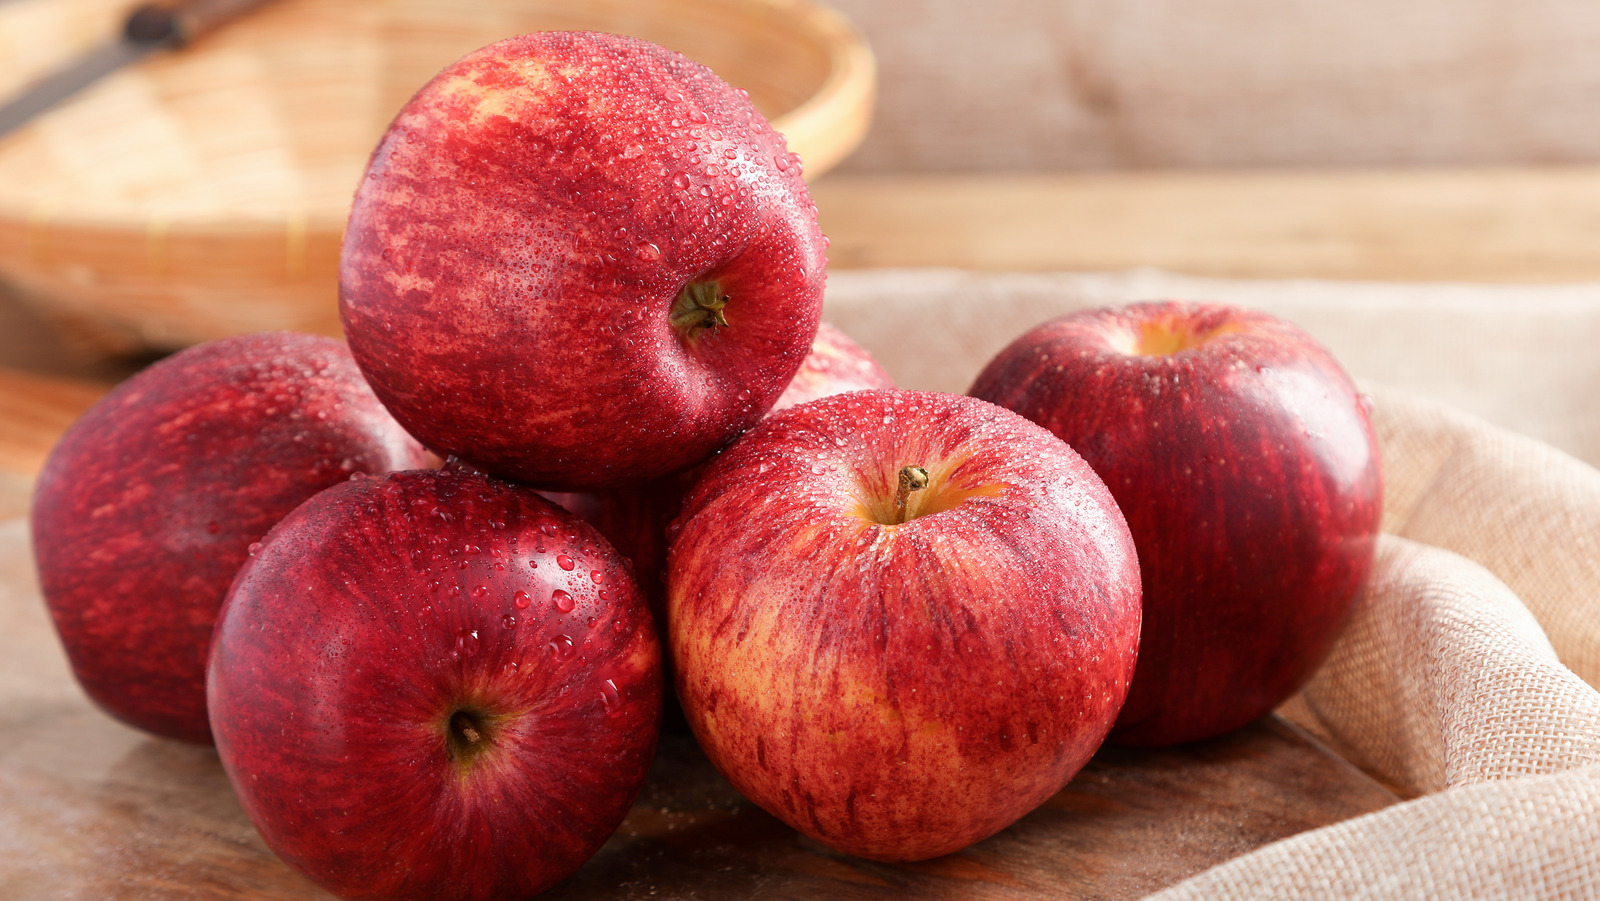 Types of Apples - Most Common Apple Varieties - Know Your Produce